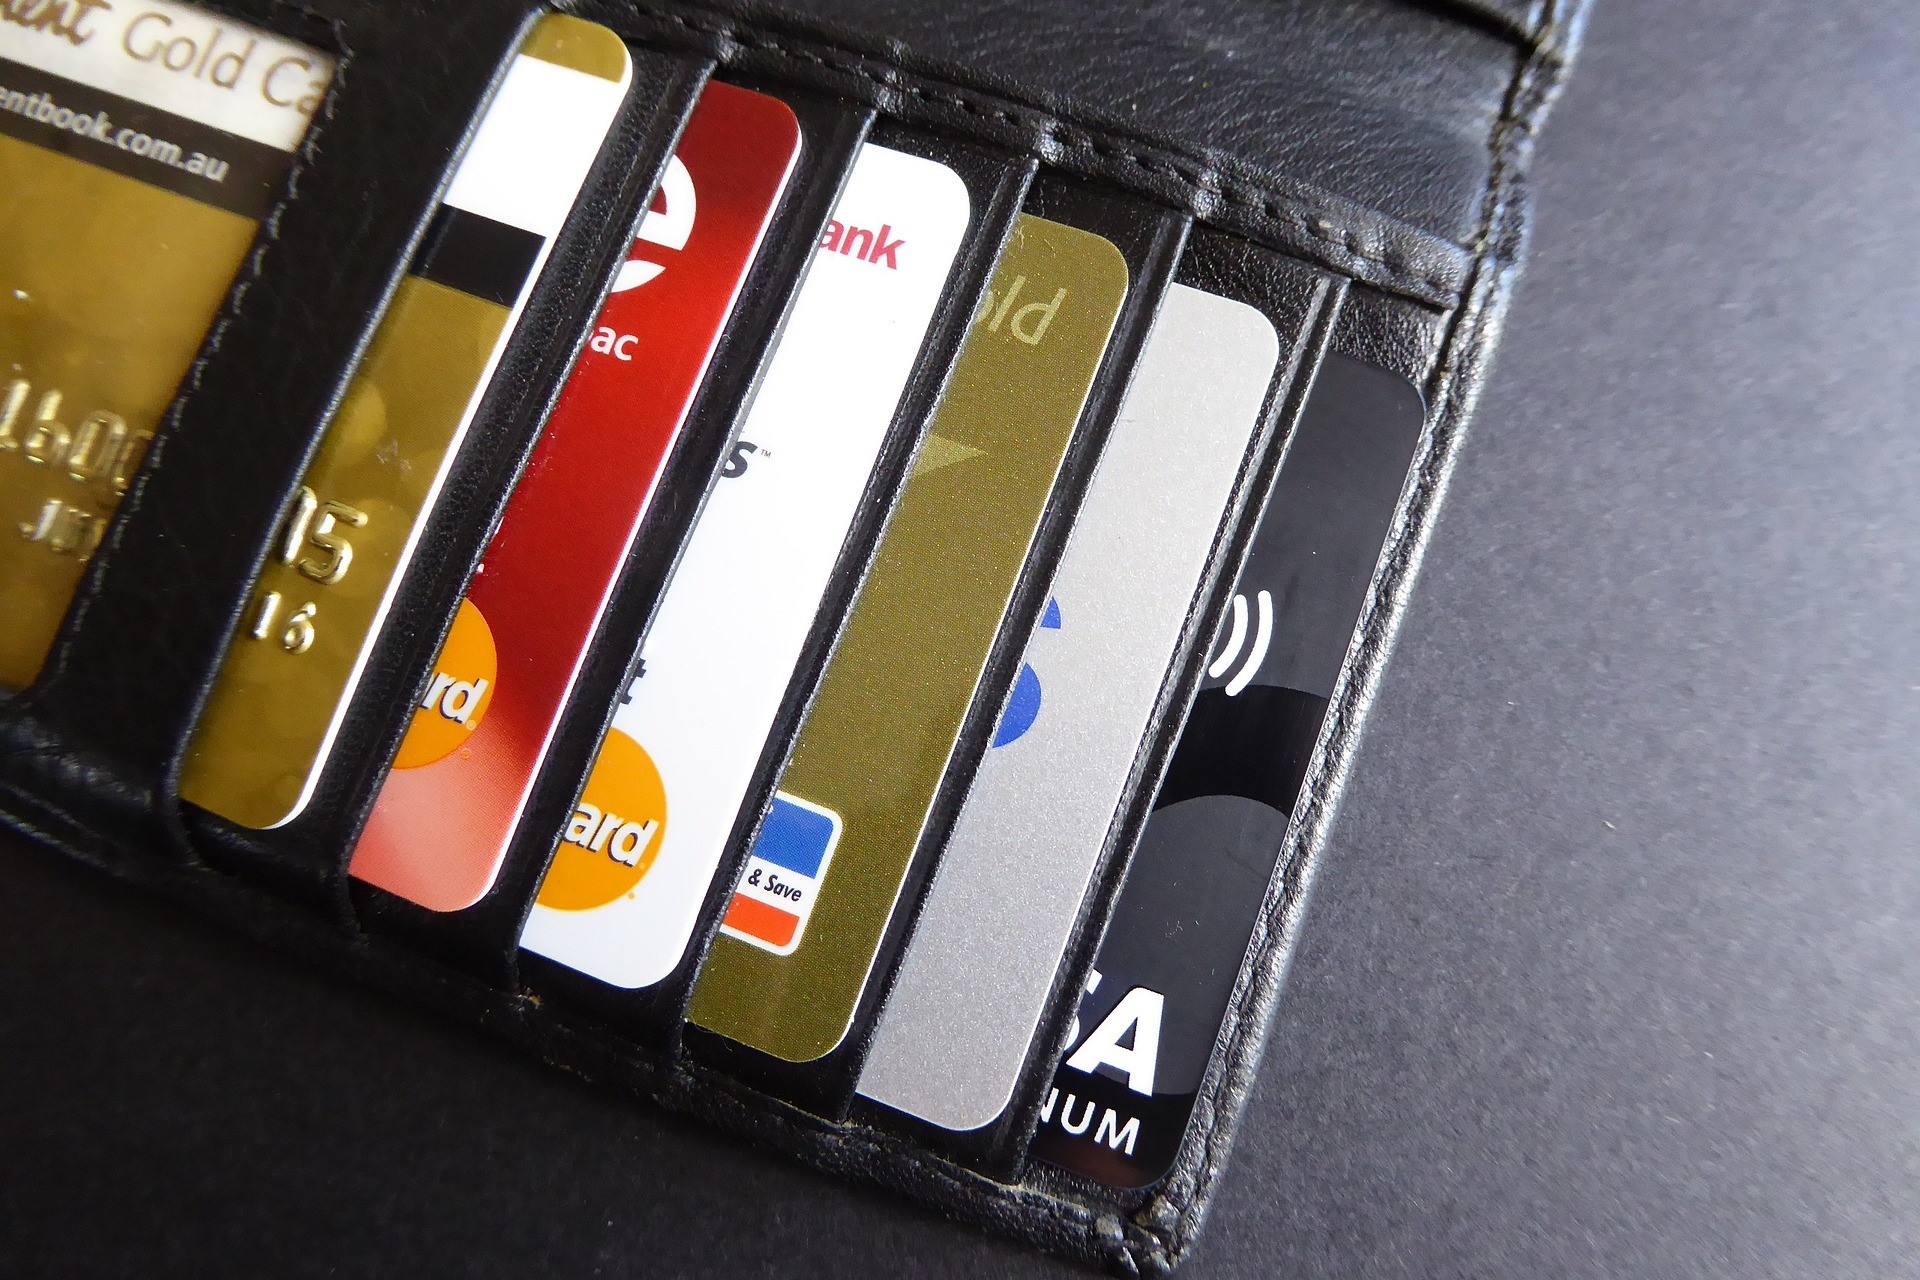 Credit Card Debt Consolidation: Pros and Cons